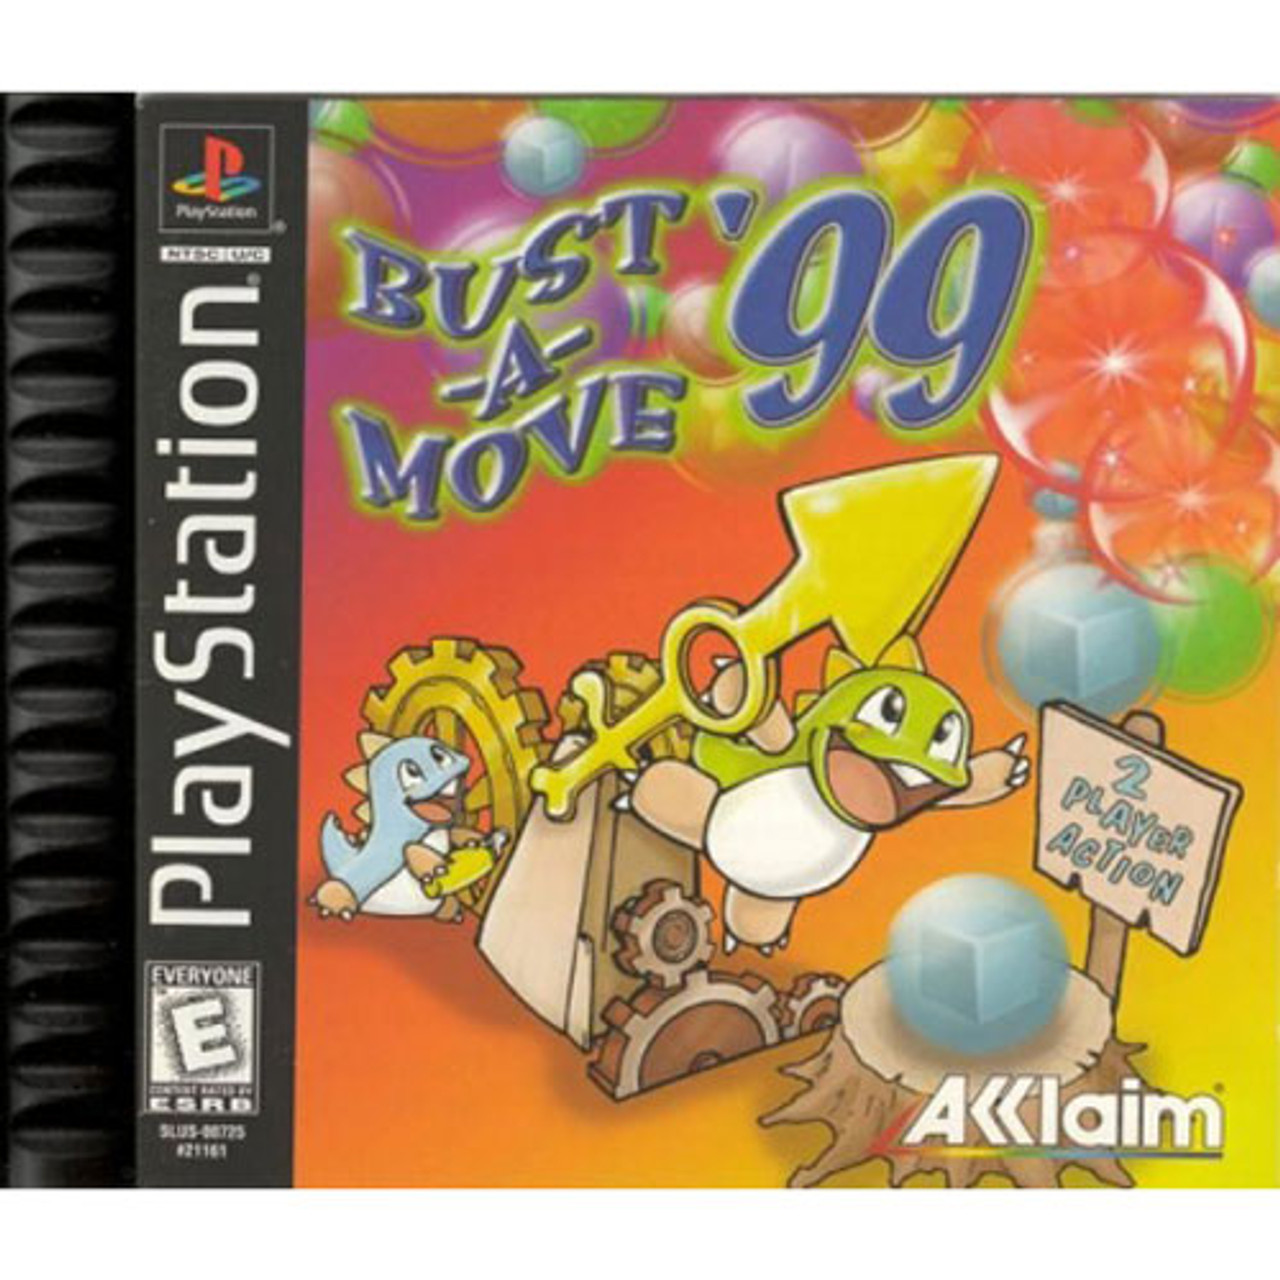 Bust-A-Move 99 PS1 Game For Sale |